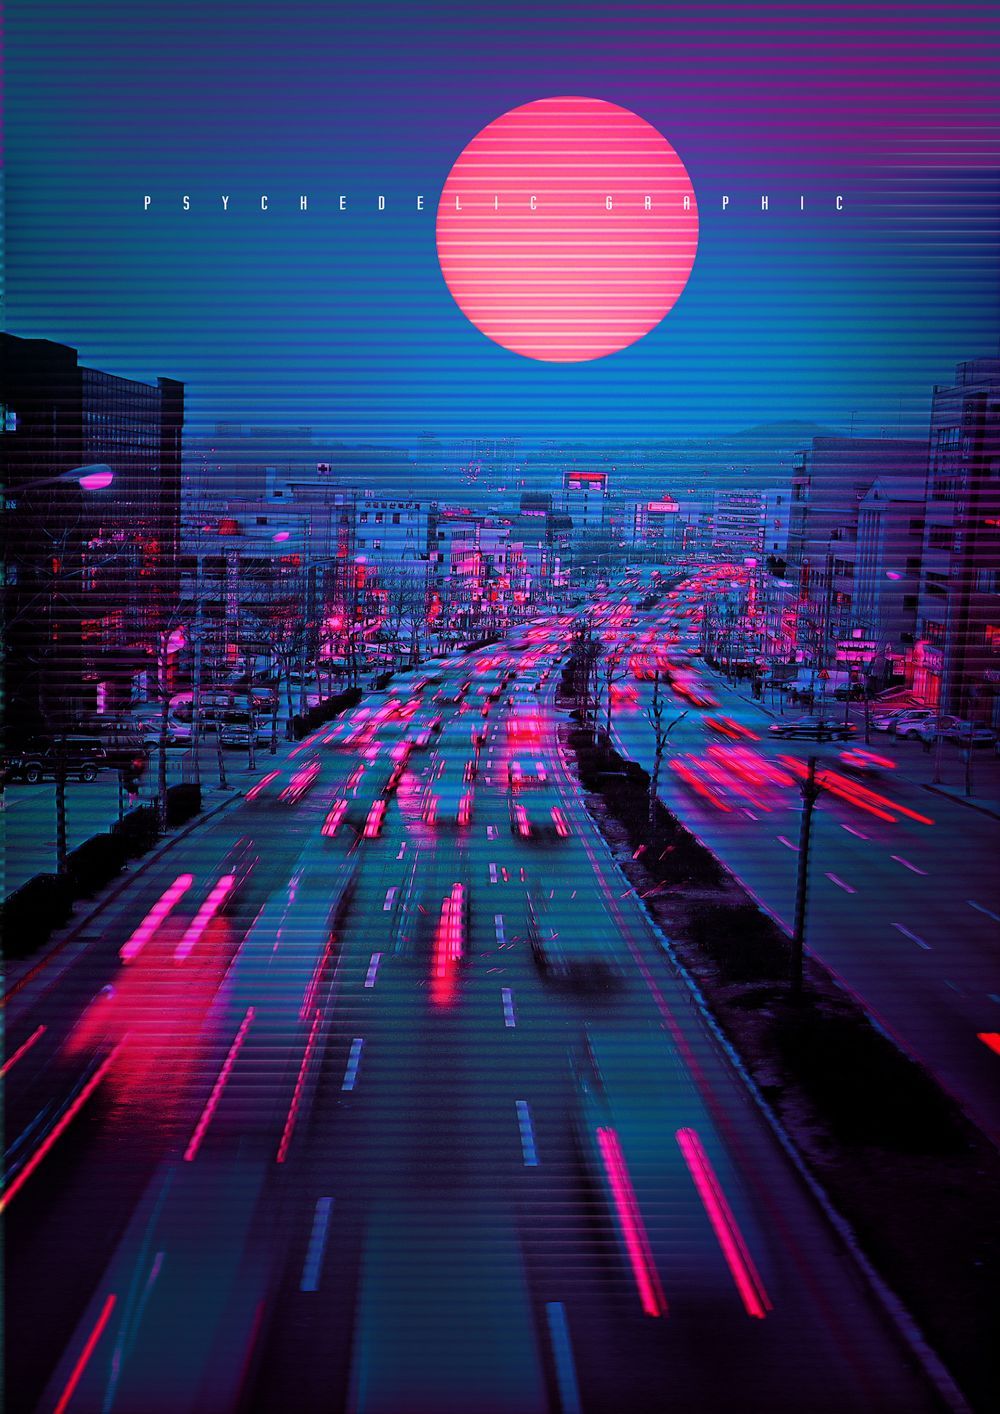 A city street at night with a large pink and blue moon in the sky - Cyberpunk